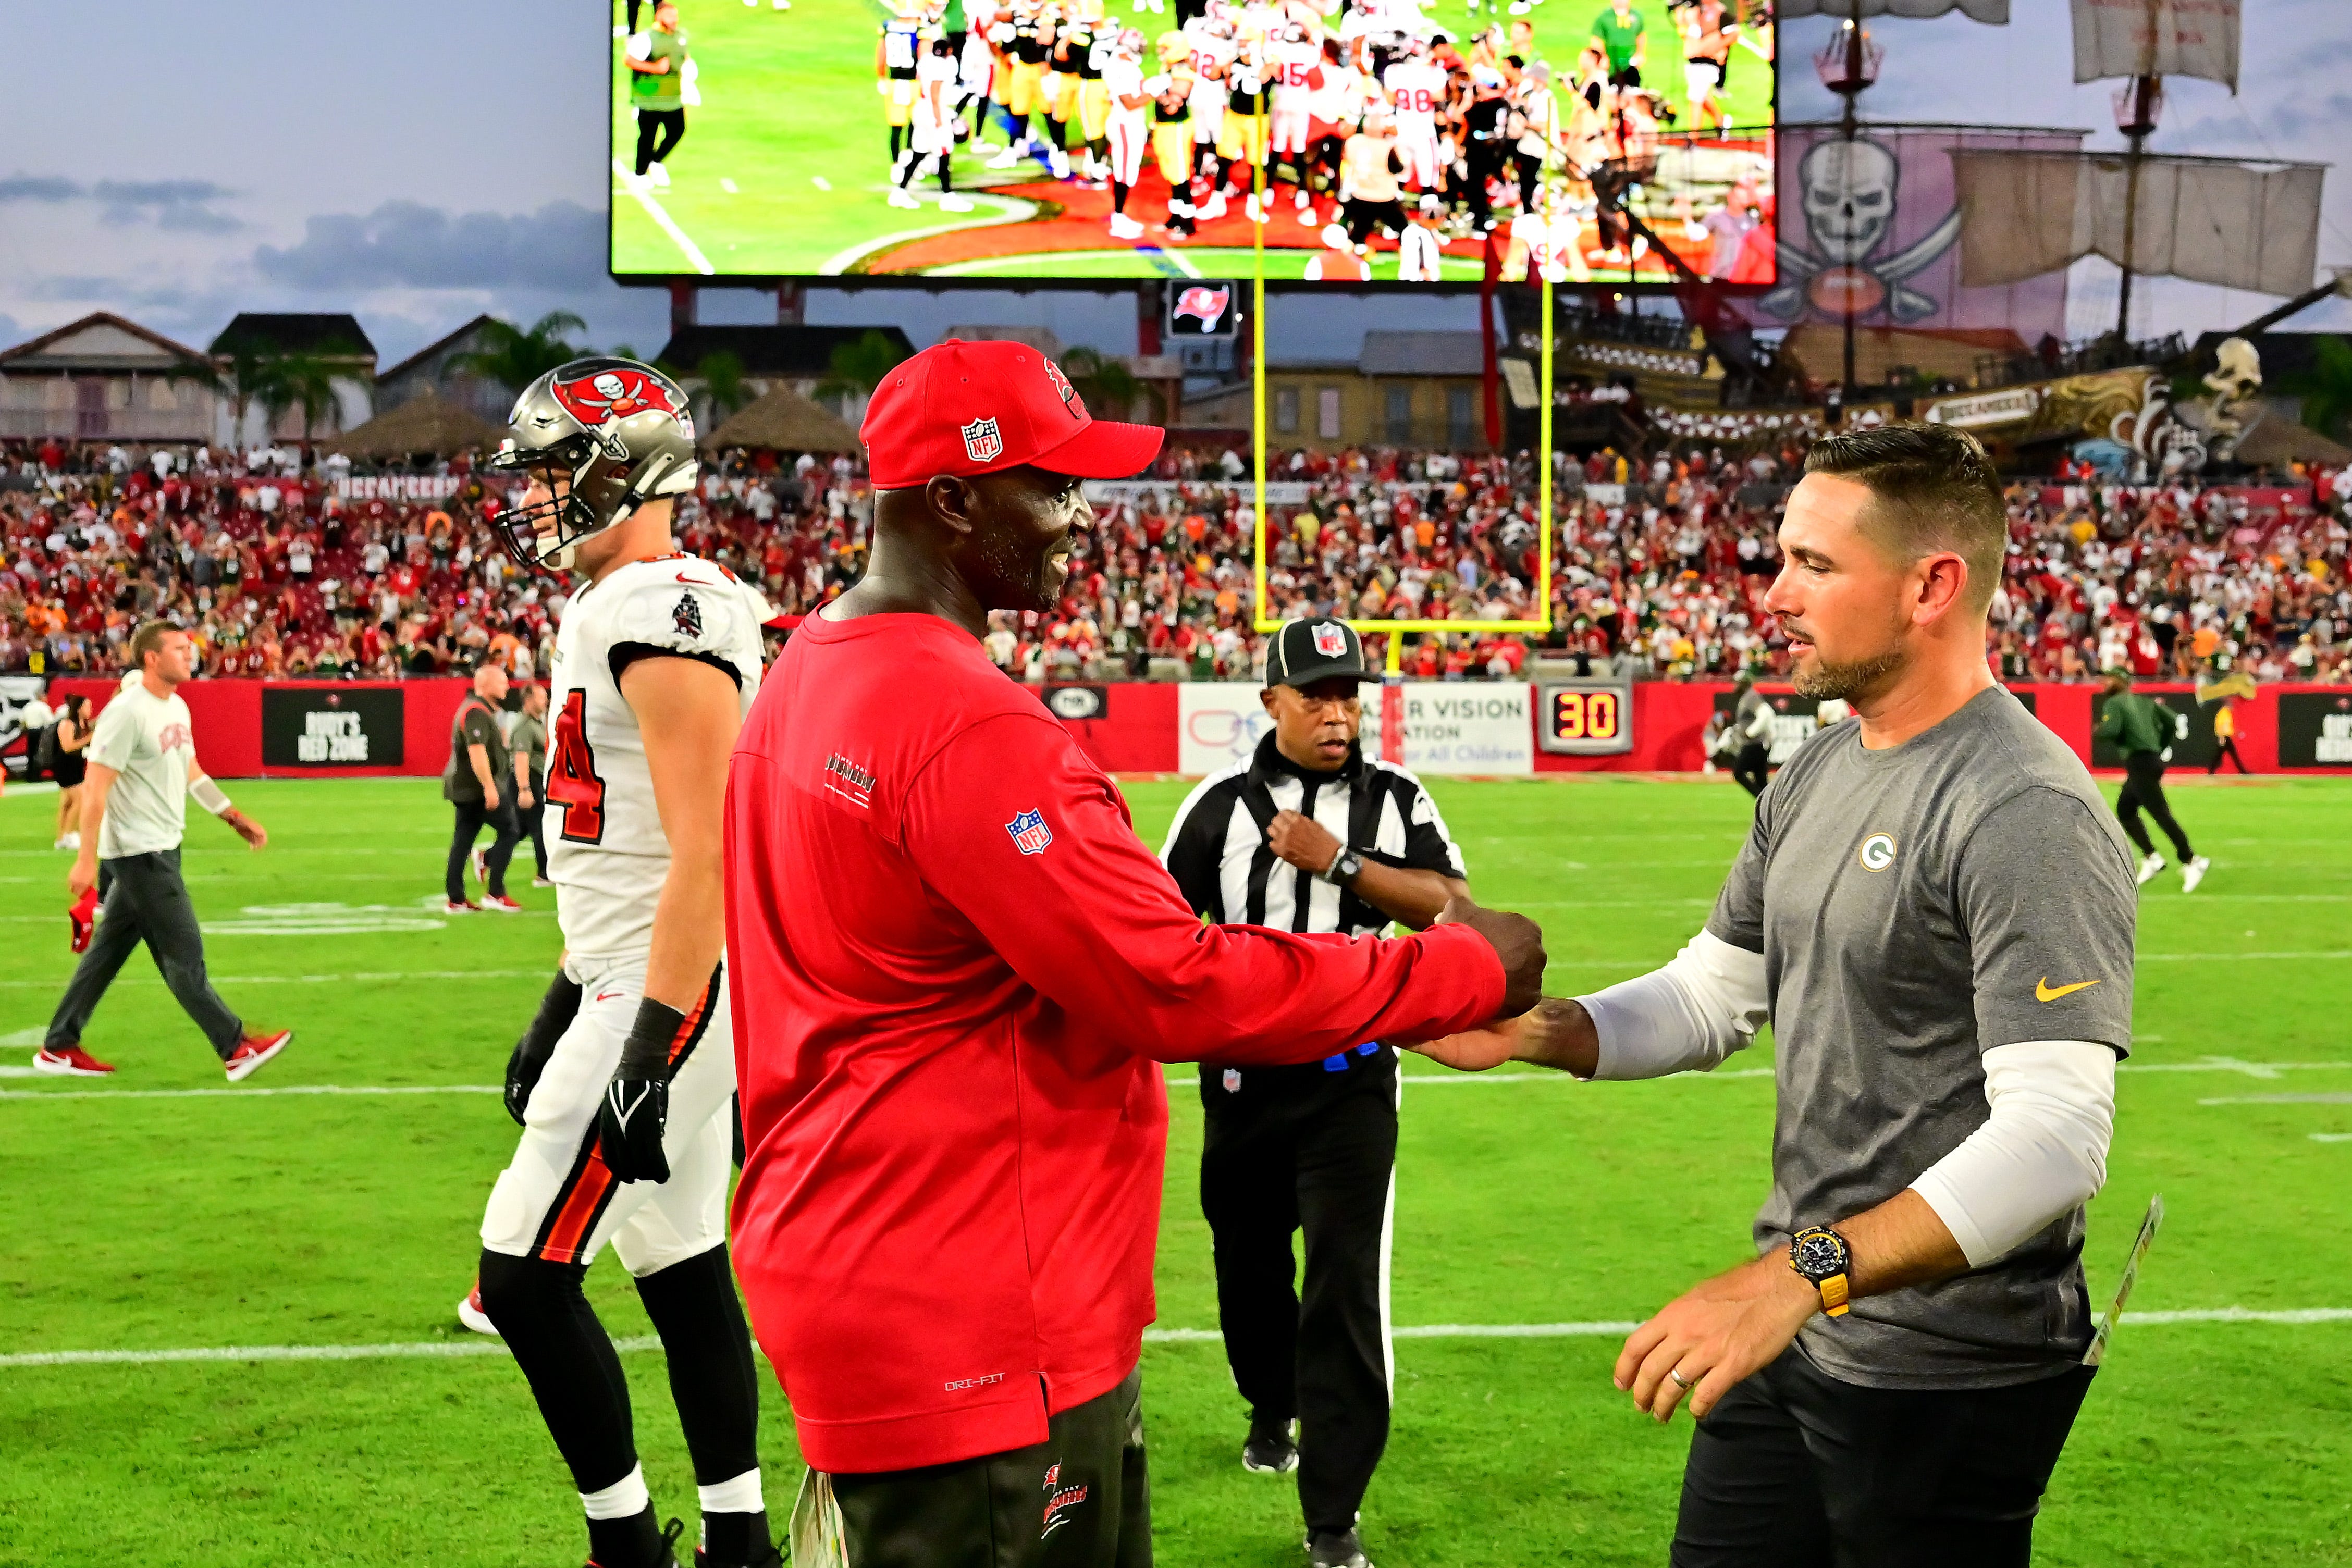 Head coach Todd Bowles of the Tampa Bay Buccaneers shakes hands with head coach Matt LaFleur of the Green Bay Packers after the game on Sept. 25, 2022, at Raymond James Stadium in Tampa, Florida. The Packers defeated the Buccaneers, 14-12.